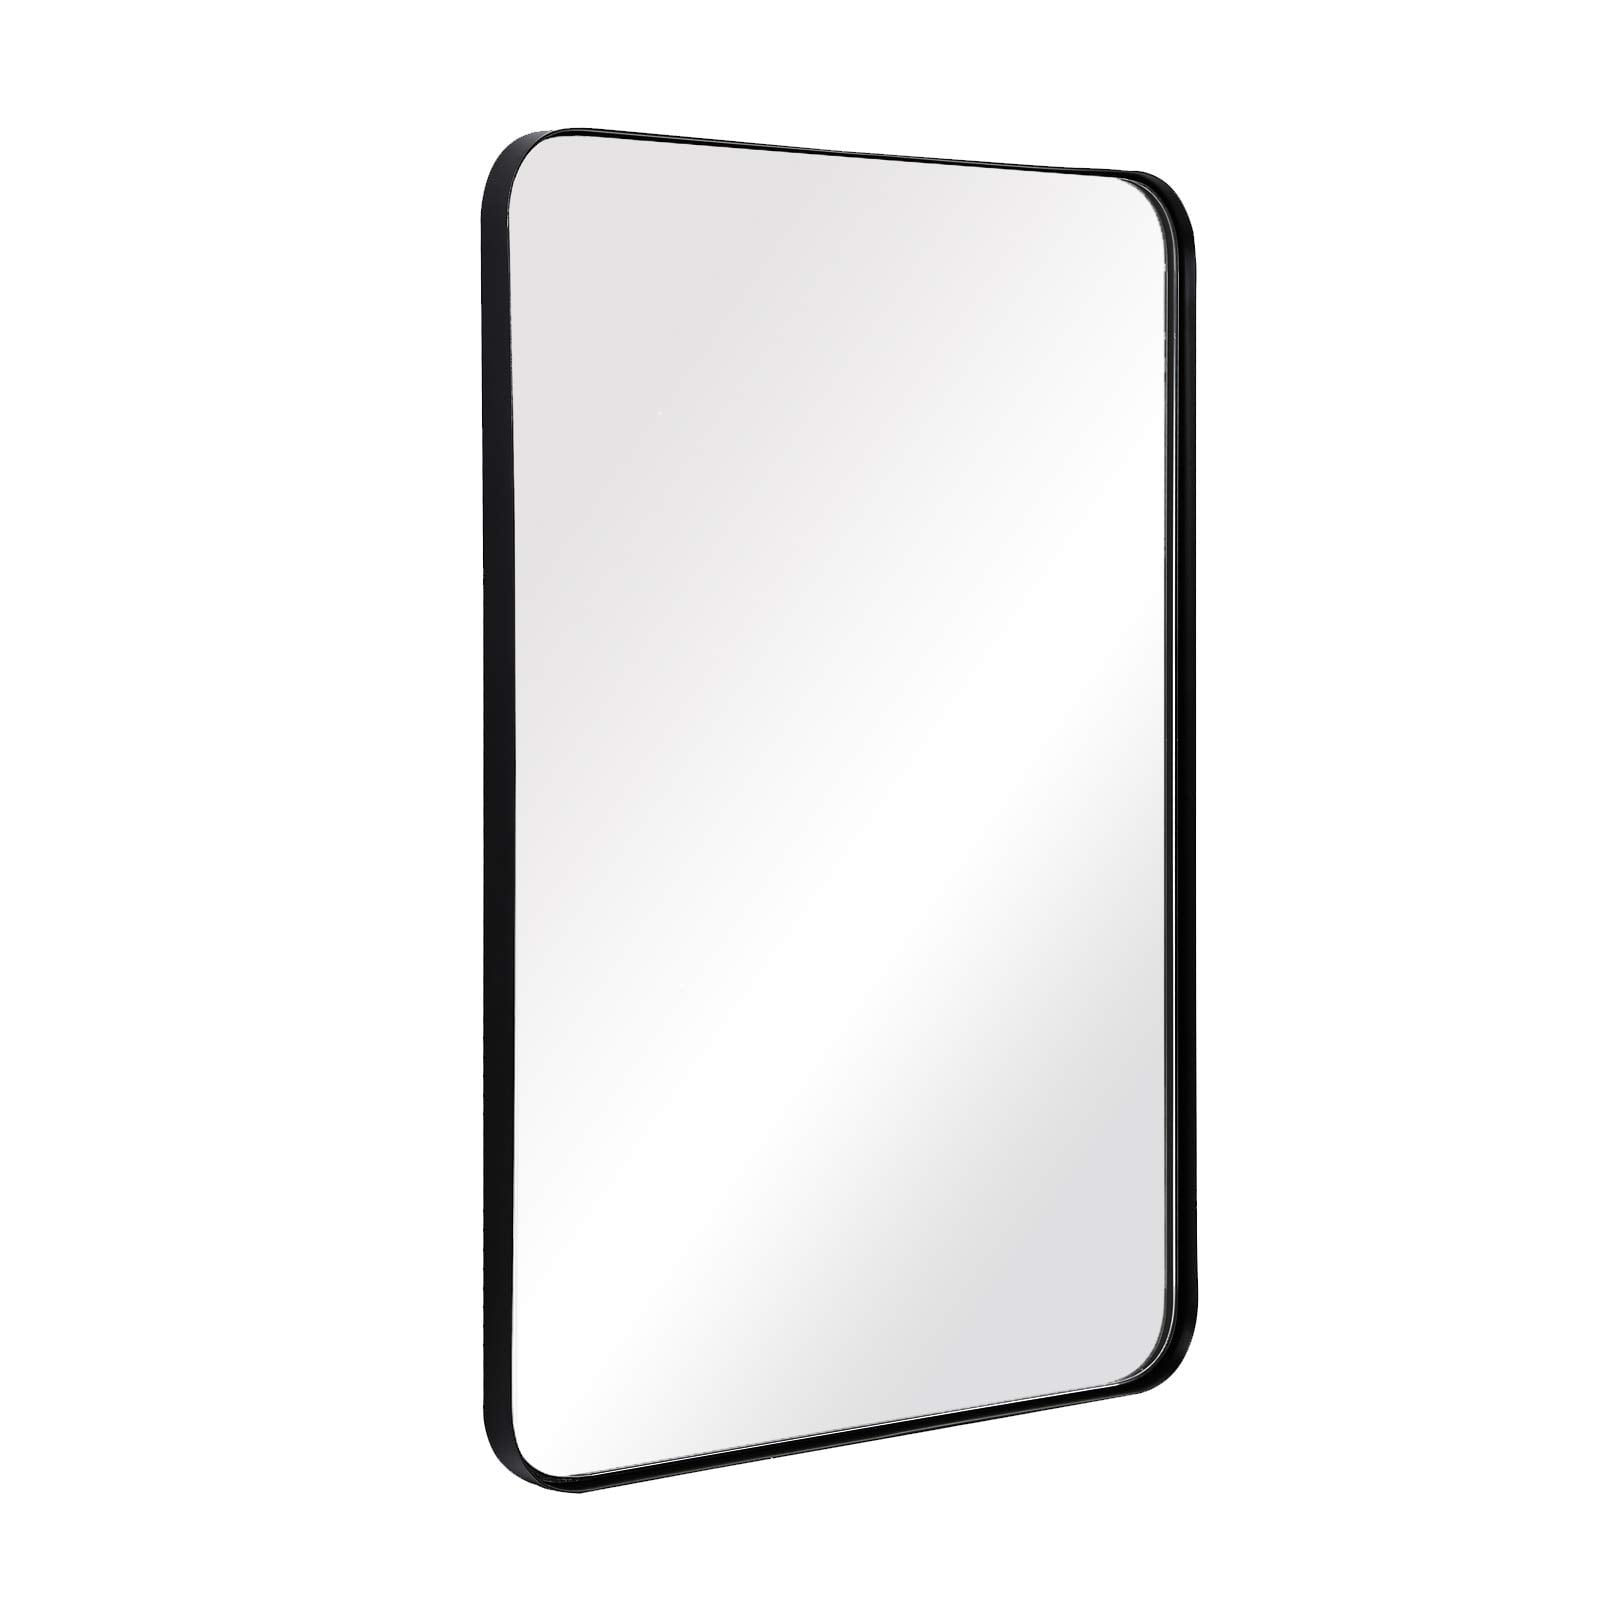 Andy Star Wall Mirror For Bathroom, Modern Stainless Steel Frame Mirror